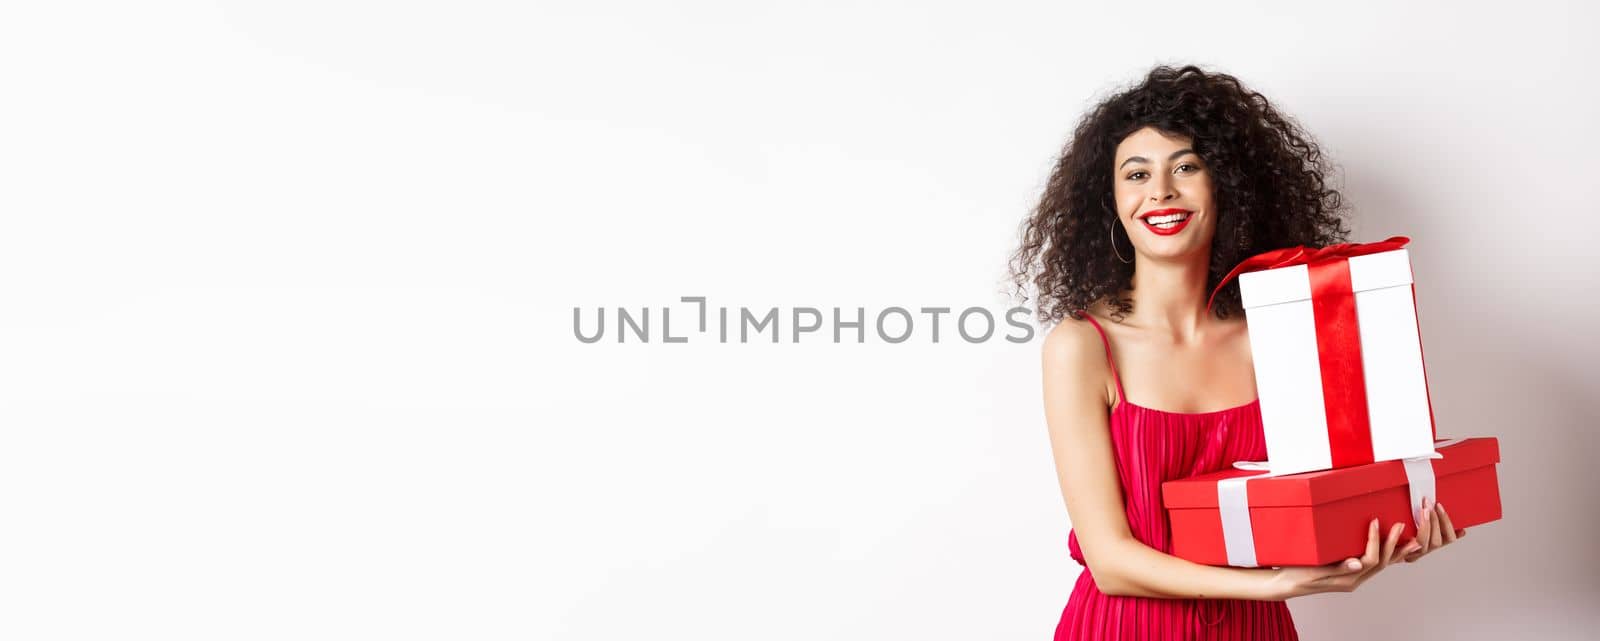 Beautiful birthday girl with curly hair, holding bday gifts and smiling happy, celebrating, standing against white background.